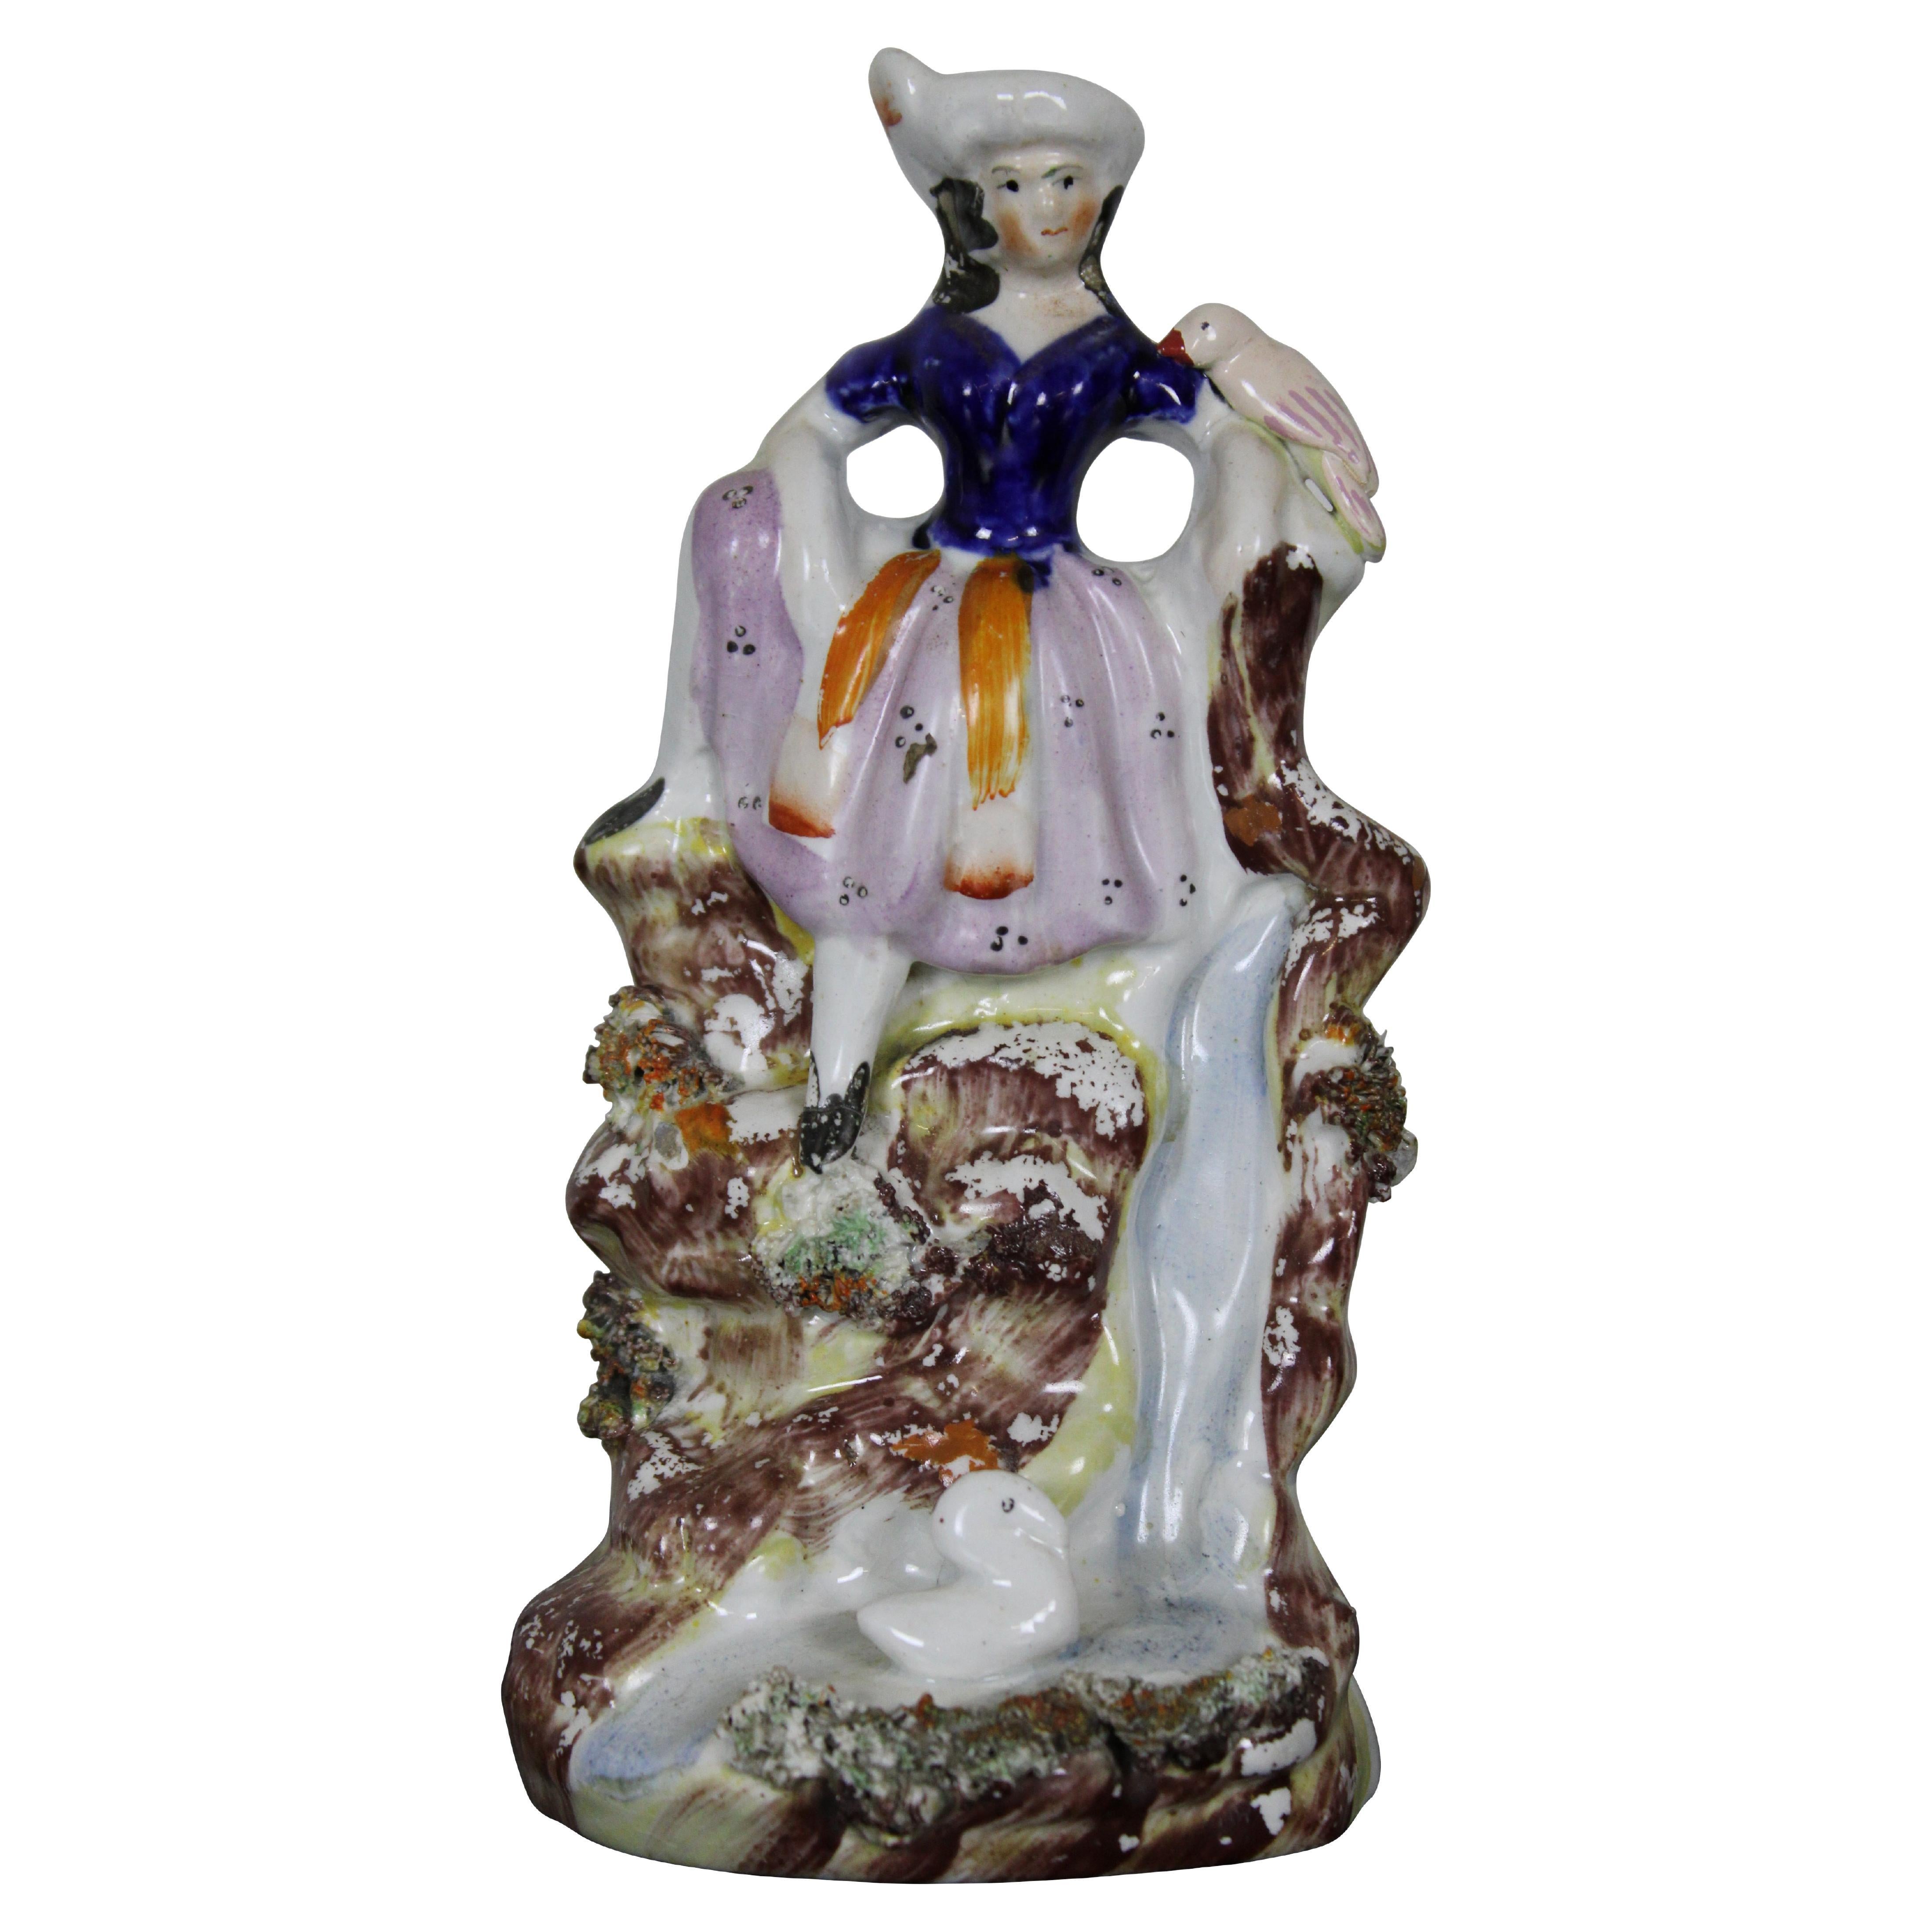 Antique English Staffordshire Porcelain Figurine Girl Seated on Waterfall Bird